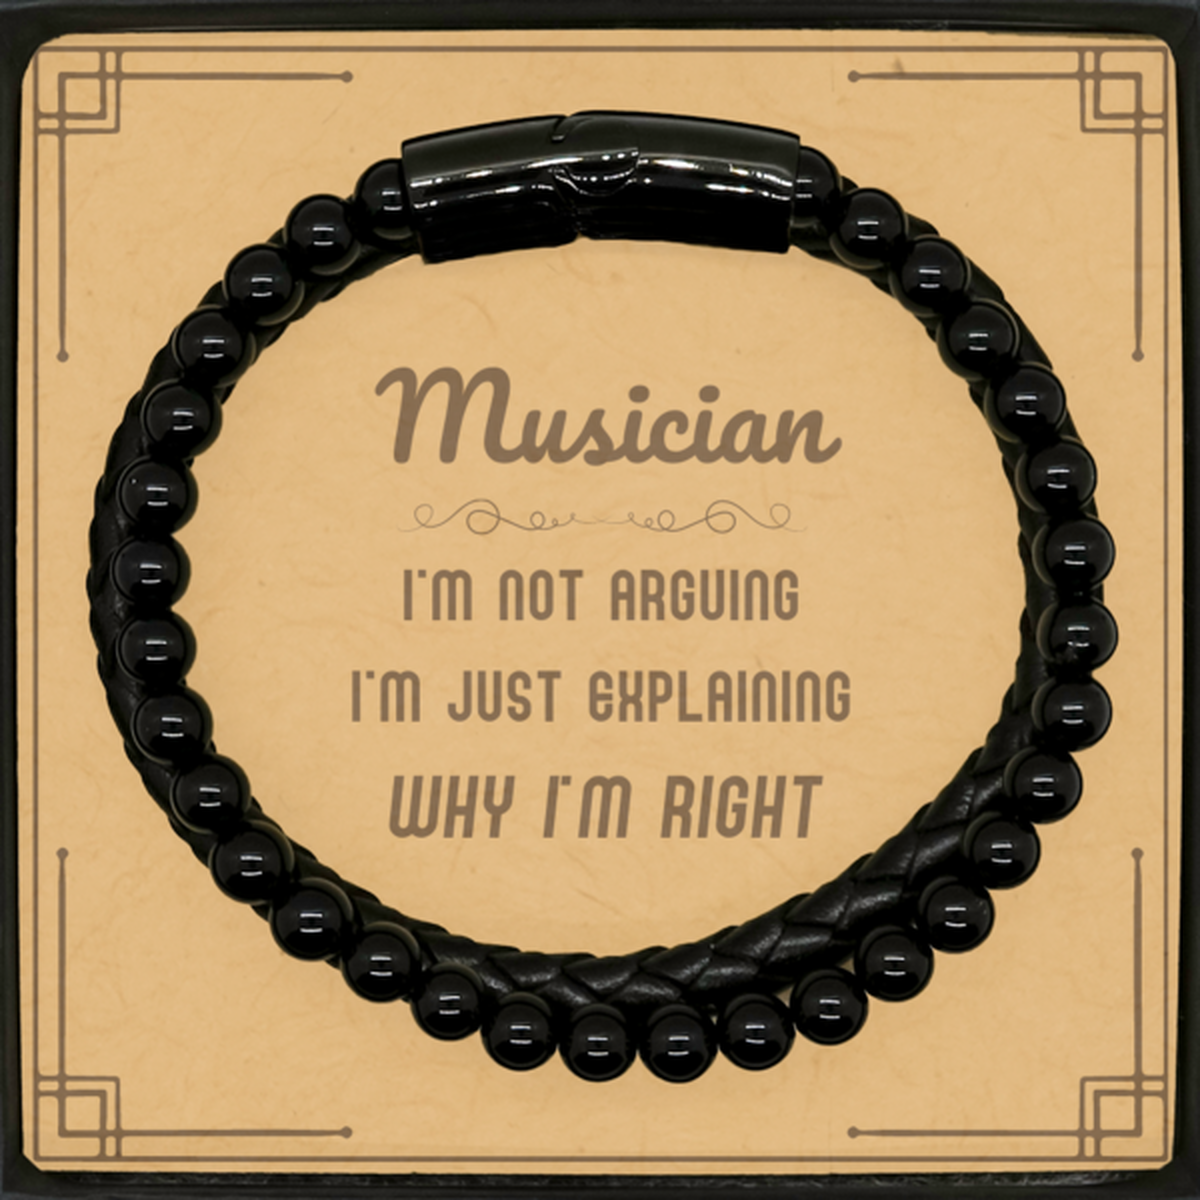 Musician I'm not Arguing. I'm Just Explaining Why I'm RIGHT Stone Leather Bracelets, Funny Saying Quote Musician Gifts For Musician Message Card Graduation Birthday Christmas Gifts for Men Women Coworker